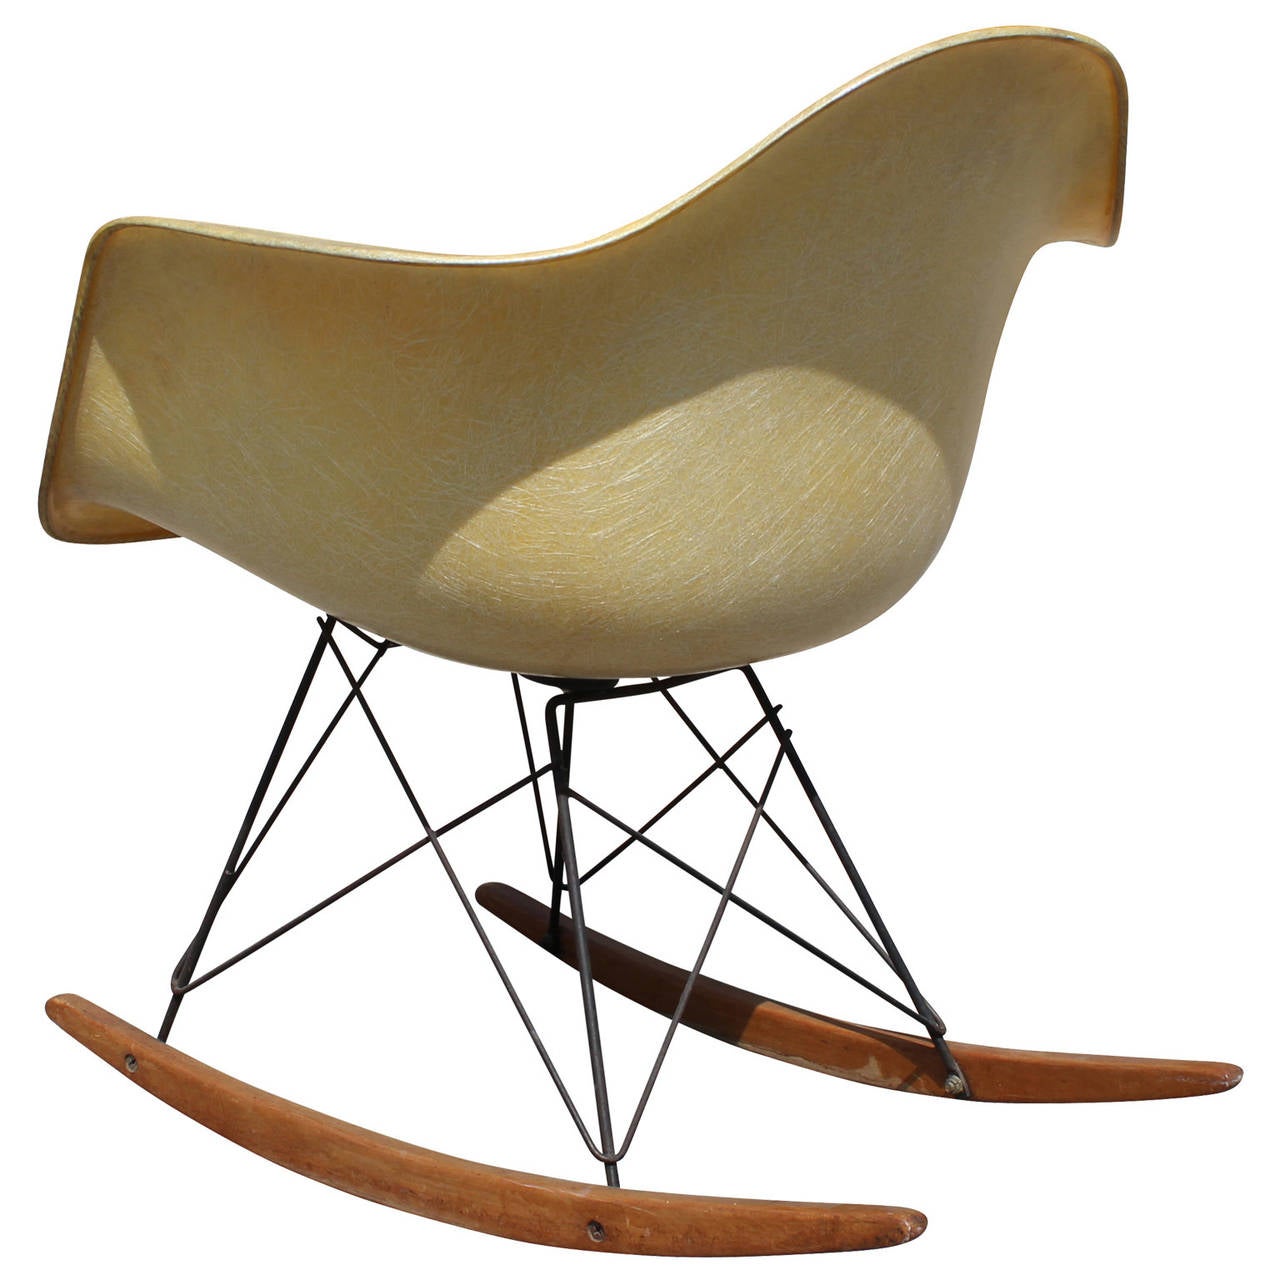 American Early Zenith Rope Edge Blonde Rocking Chair by Charles and Ray Eames